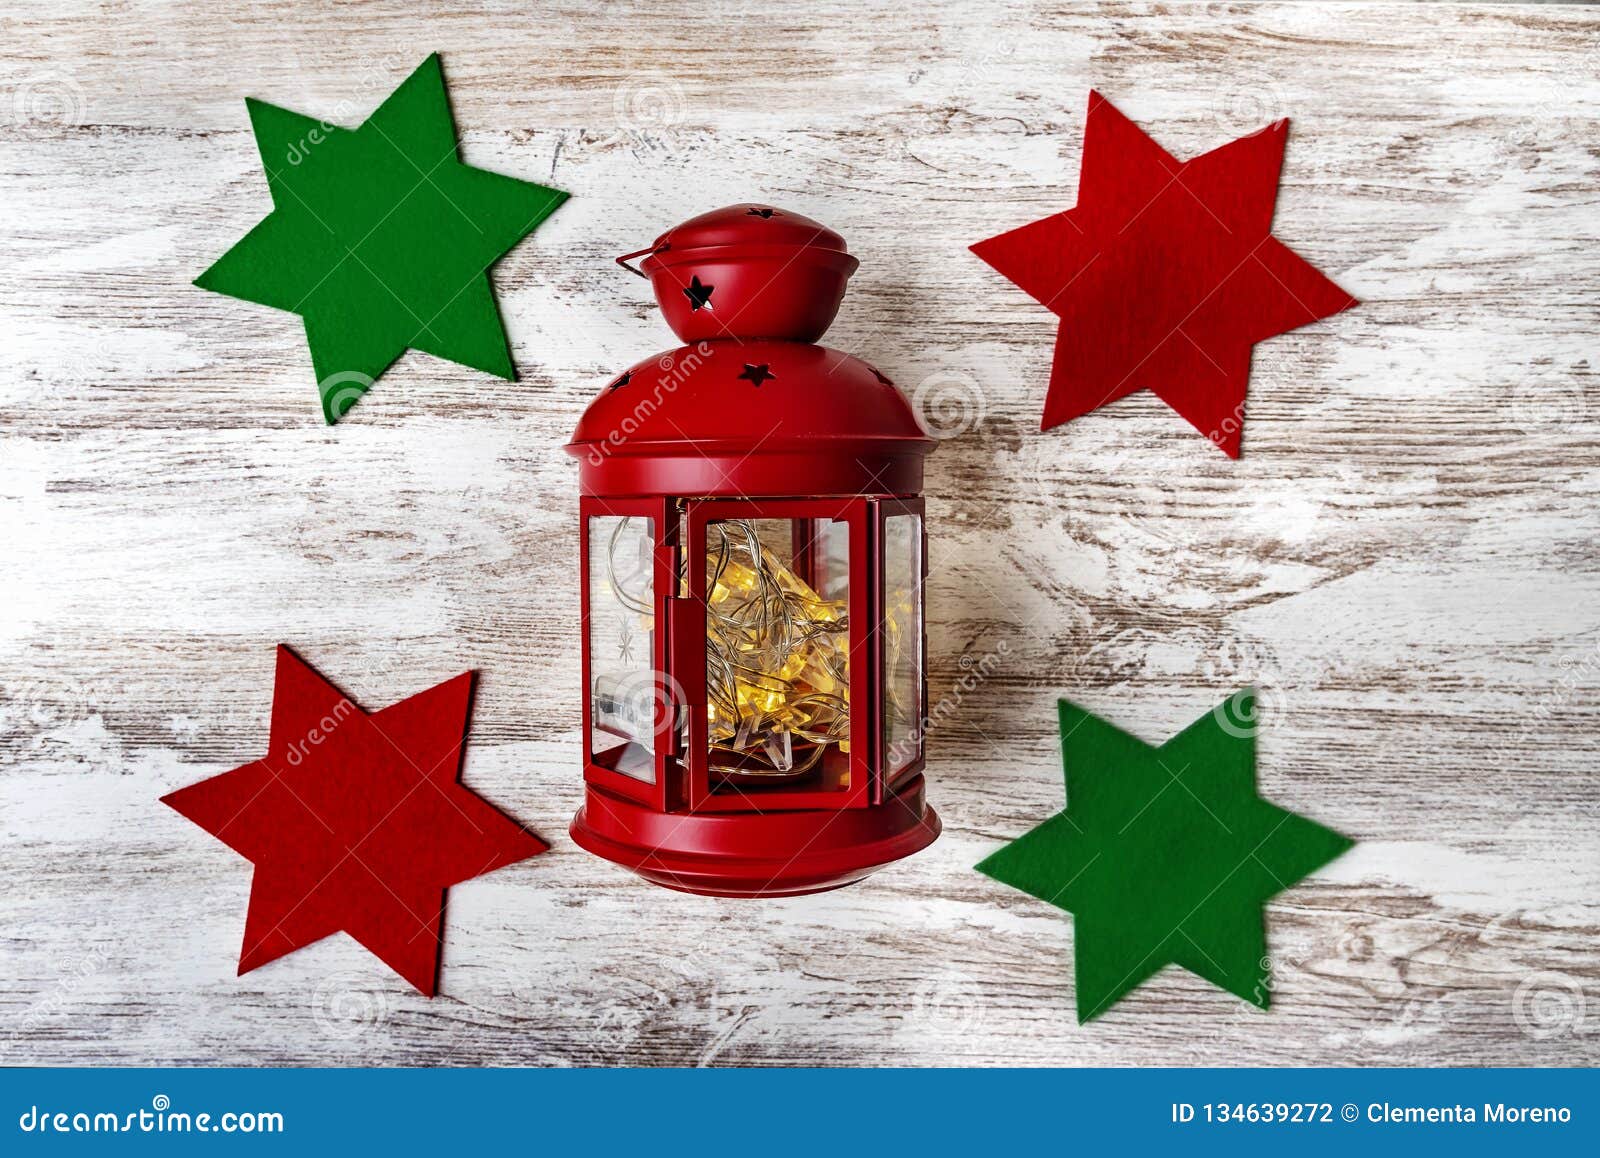 Red Christmas Lantern Background Stock Photo - Image of party ...